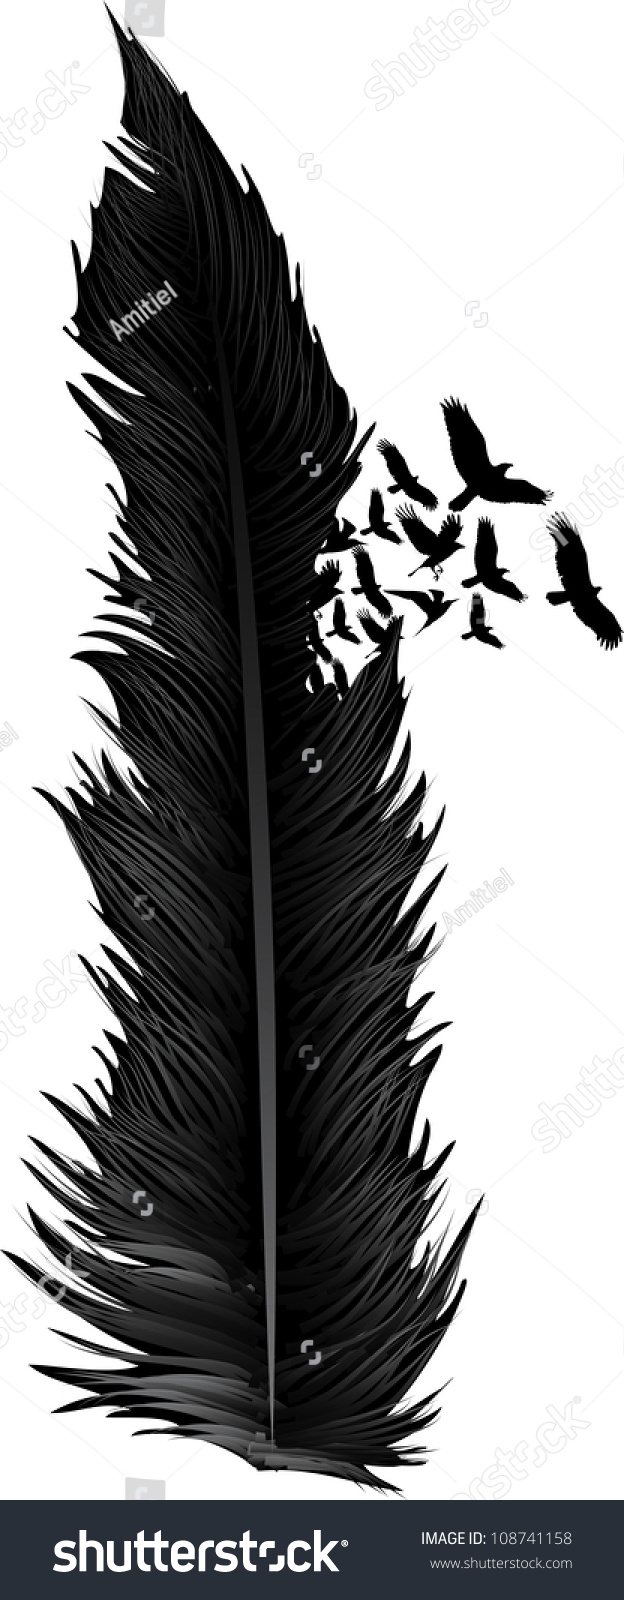 Birds And Feather Stock Vector Illustration 108741158 : Shutterstock